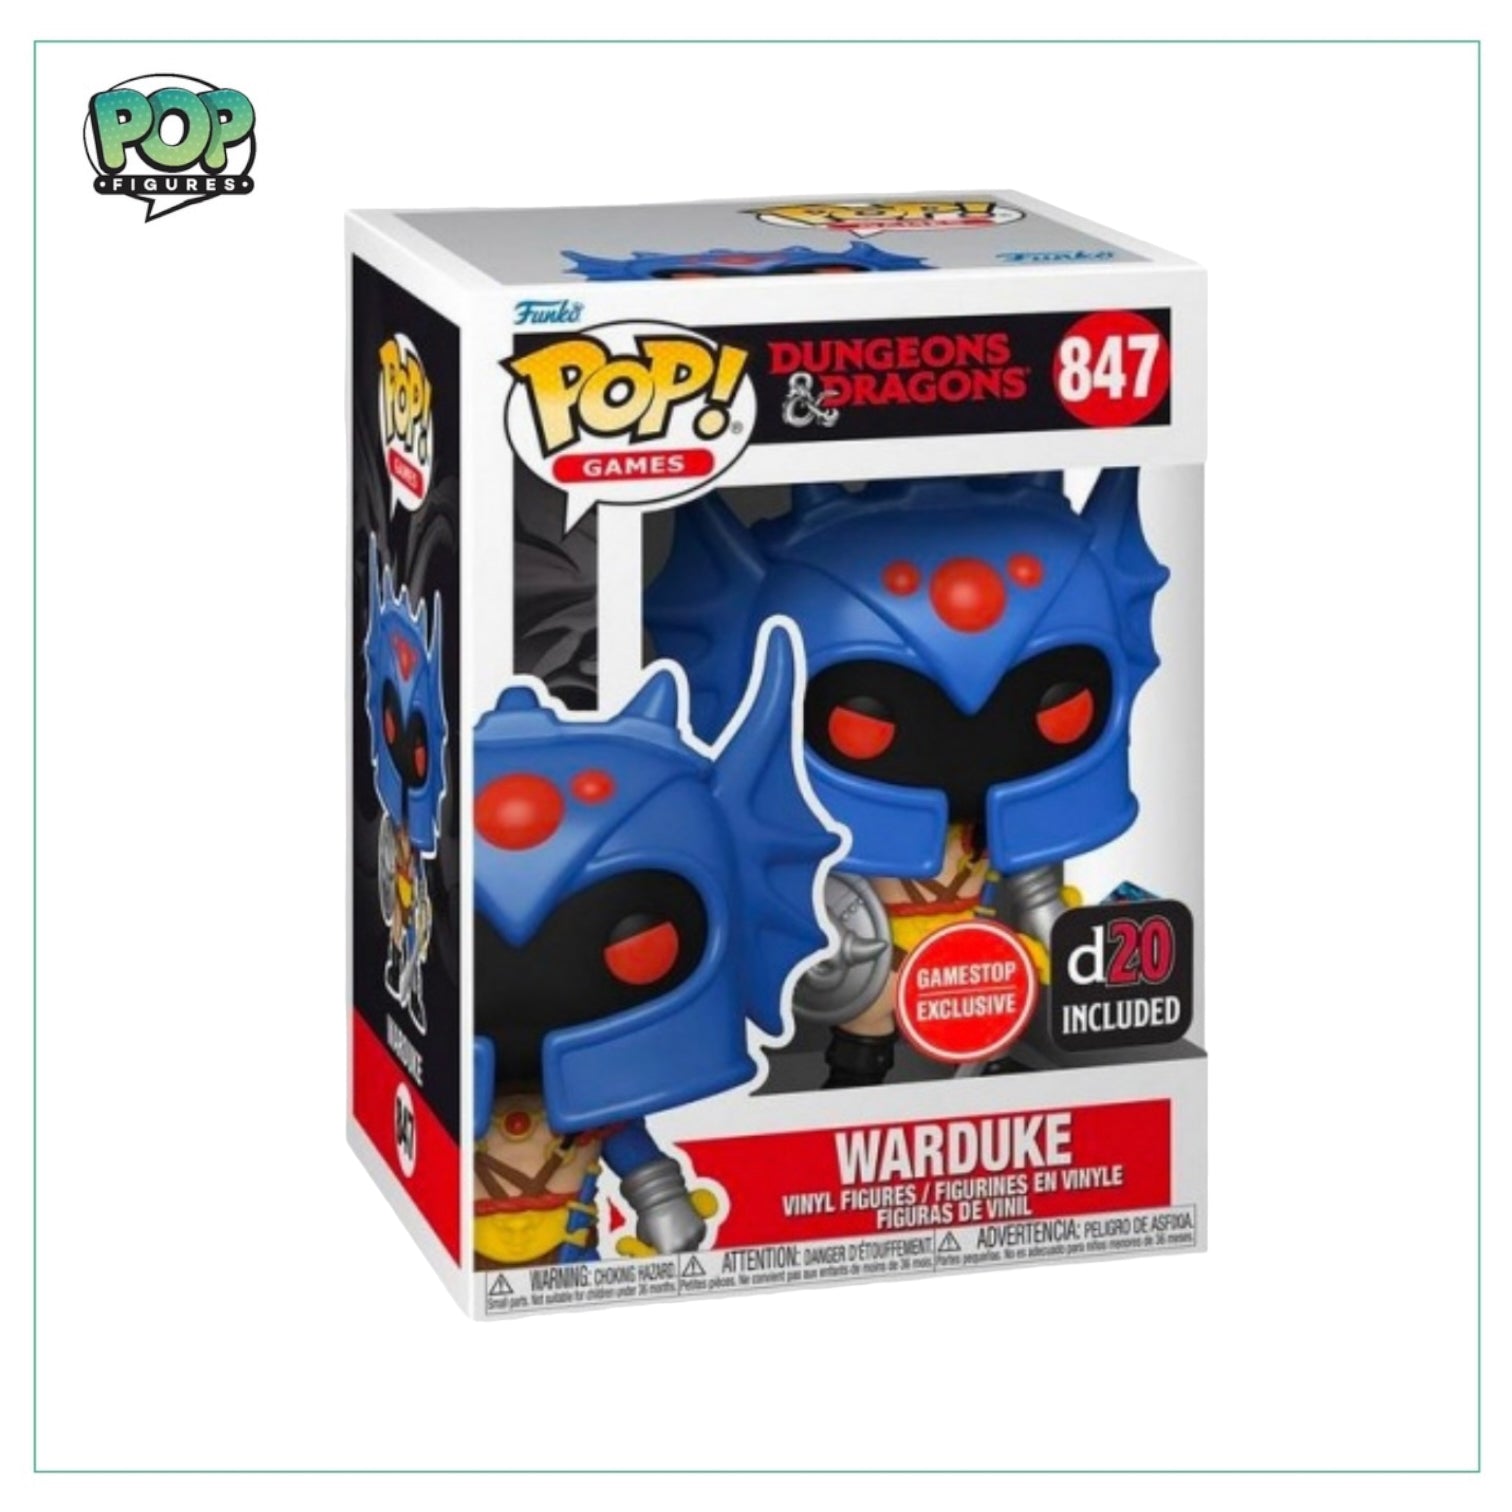 Warduke #847 Funko Pop! - Dungeons & Dragons - GameStop Exclusive - D20 Included - Angry Cat